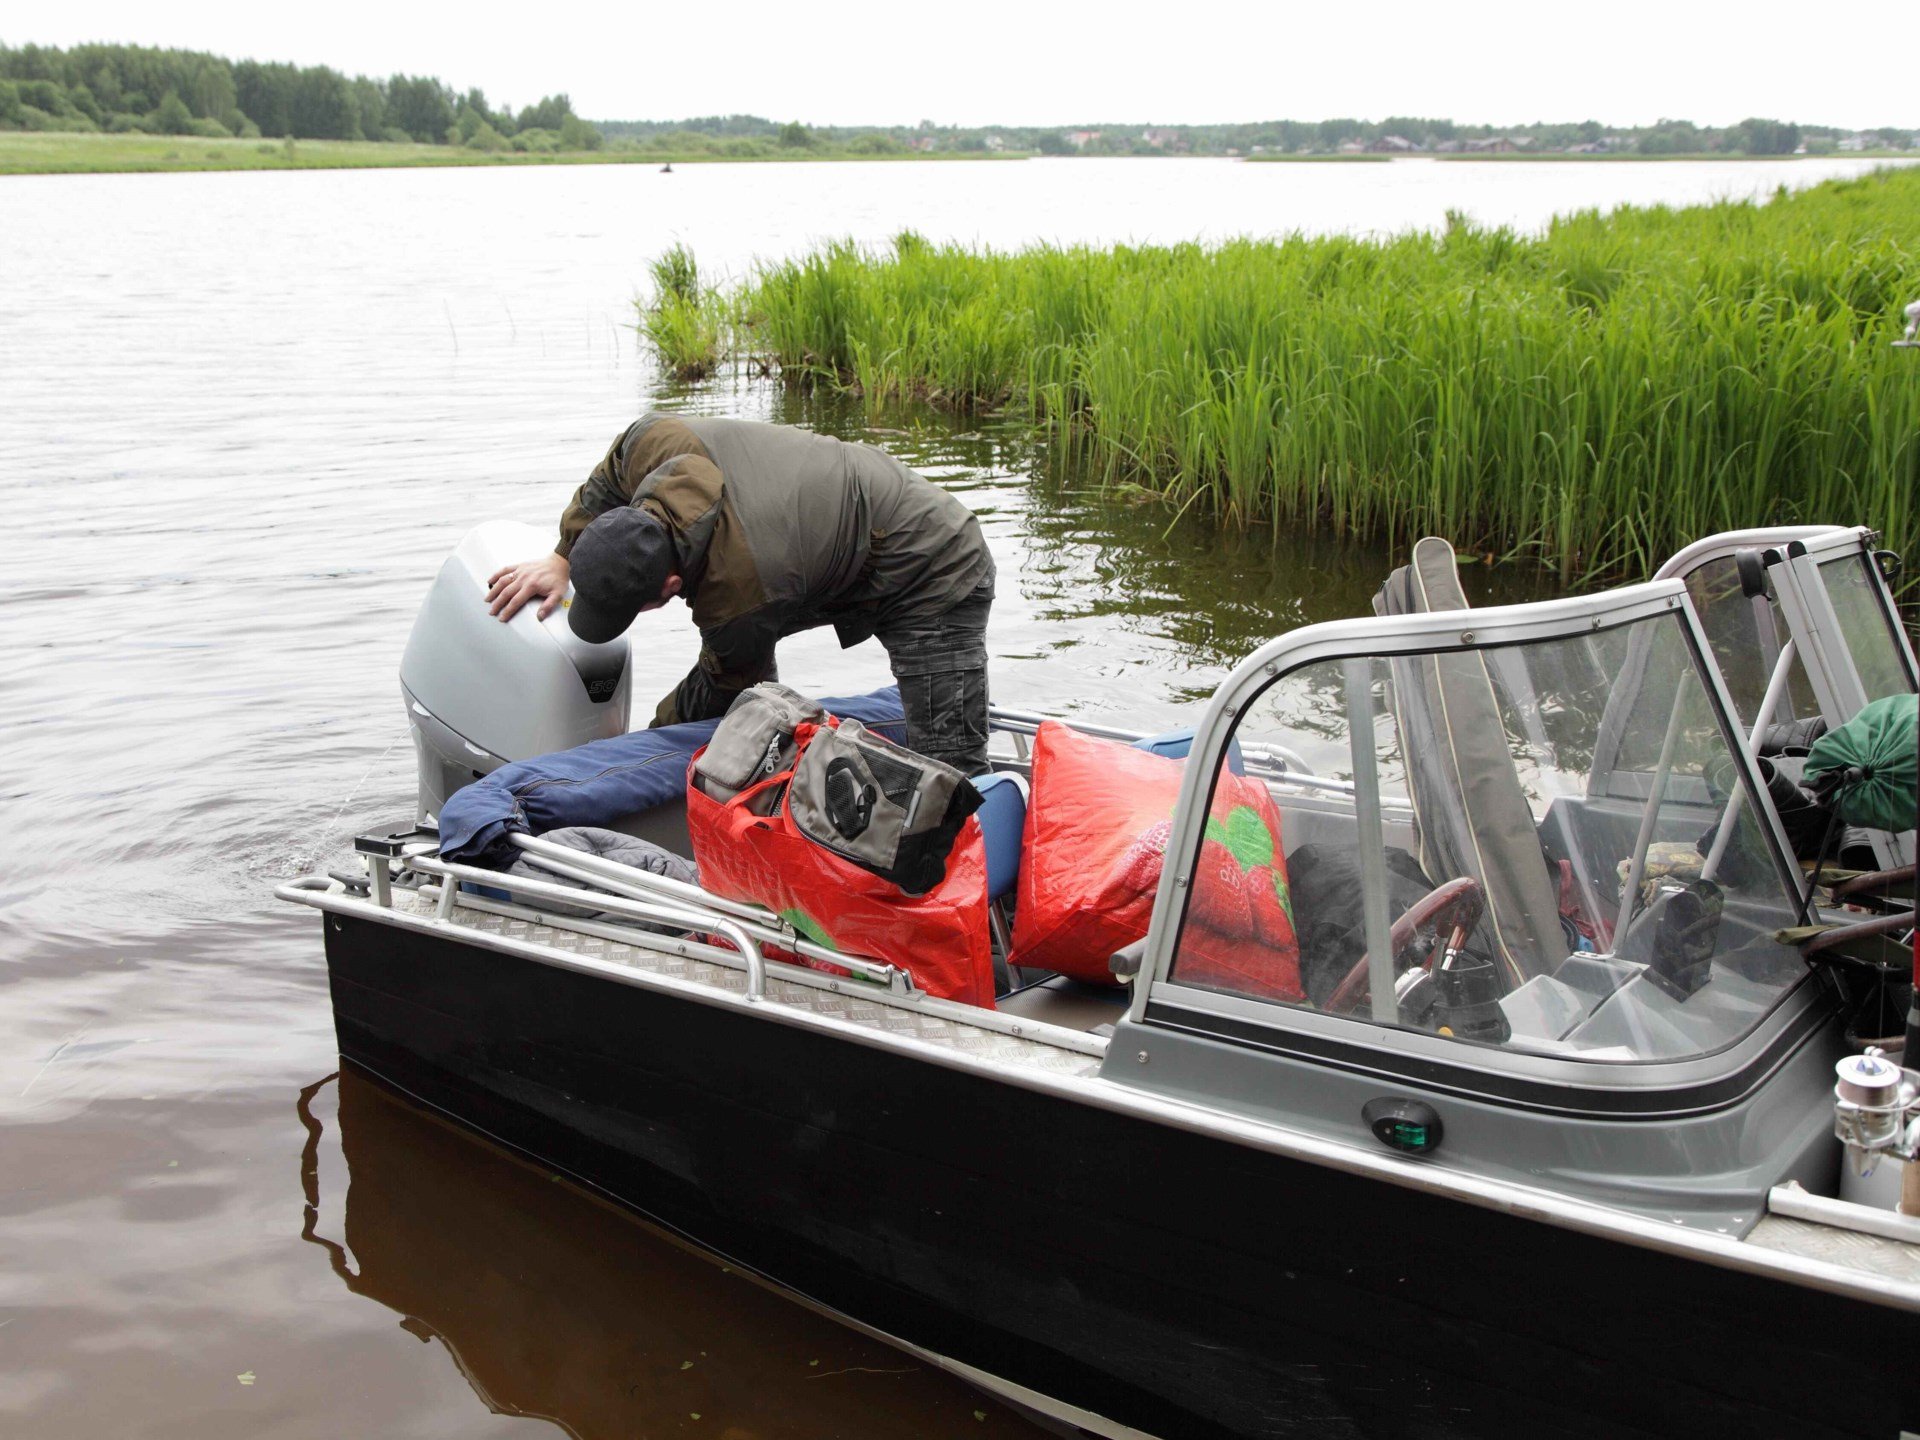 A man attempting a boat repair while sitting in calm water surrounded by green grass